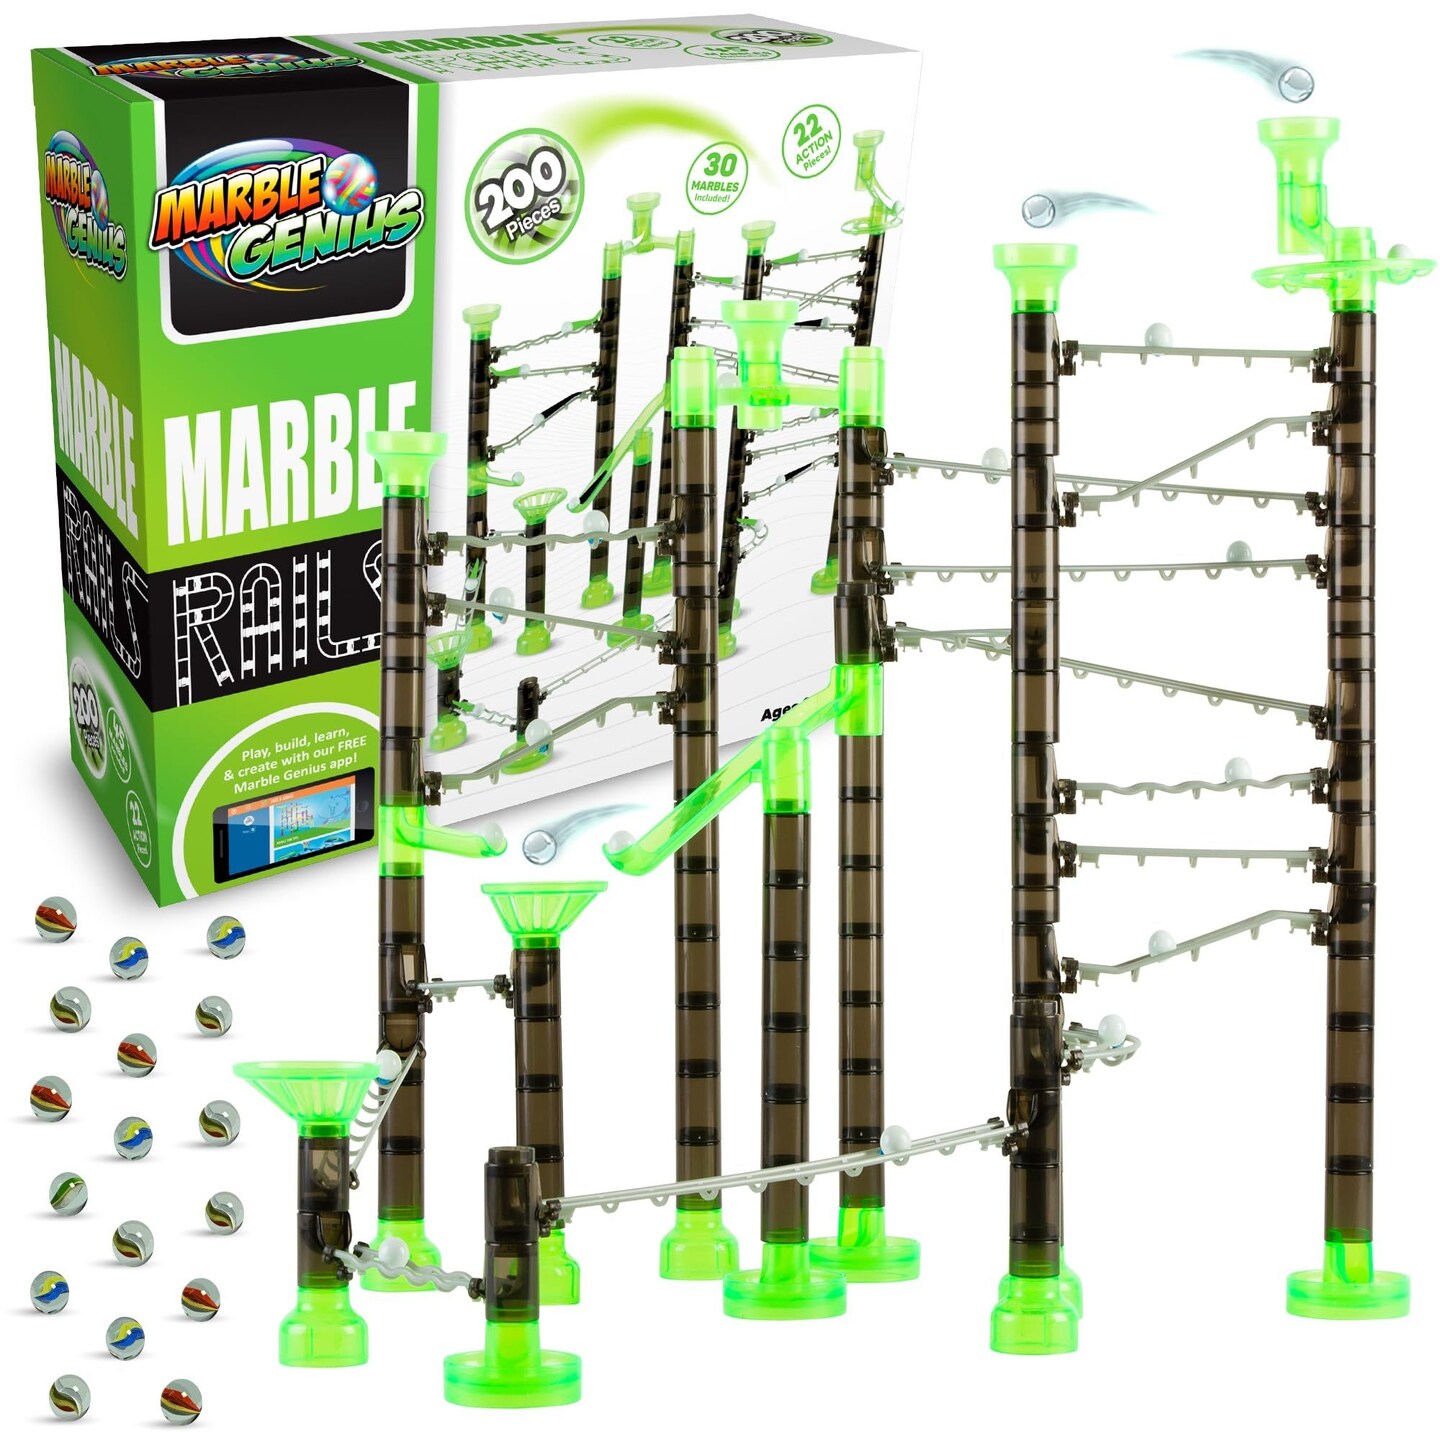 Marble Genius Marble Rails Starter Set, 200 Piece Marble Run (30 Marbles, 30 Rail Pieces, 12 Base Pieces, and More), with Online App and Full-Color Instructions